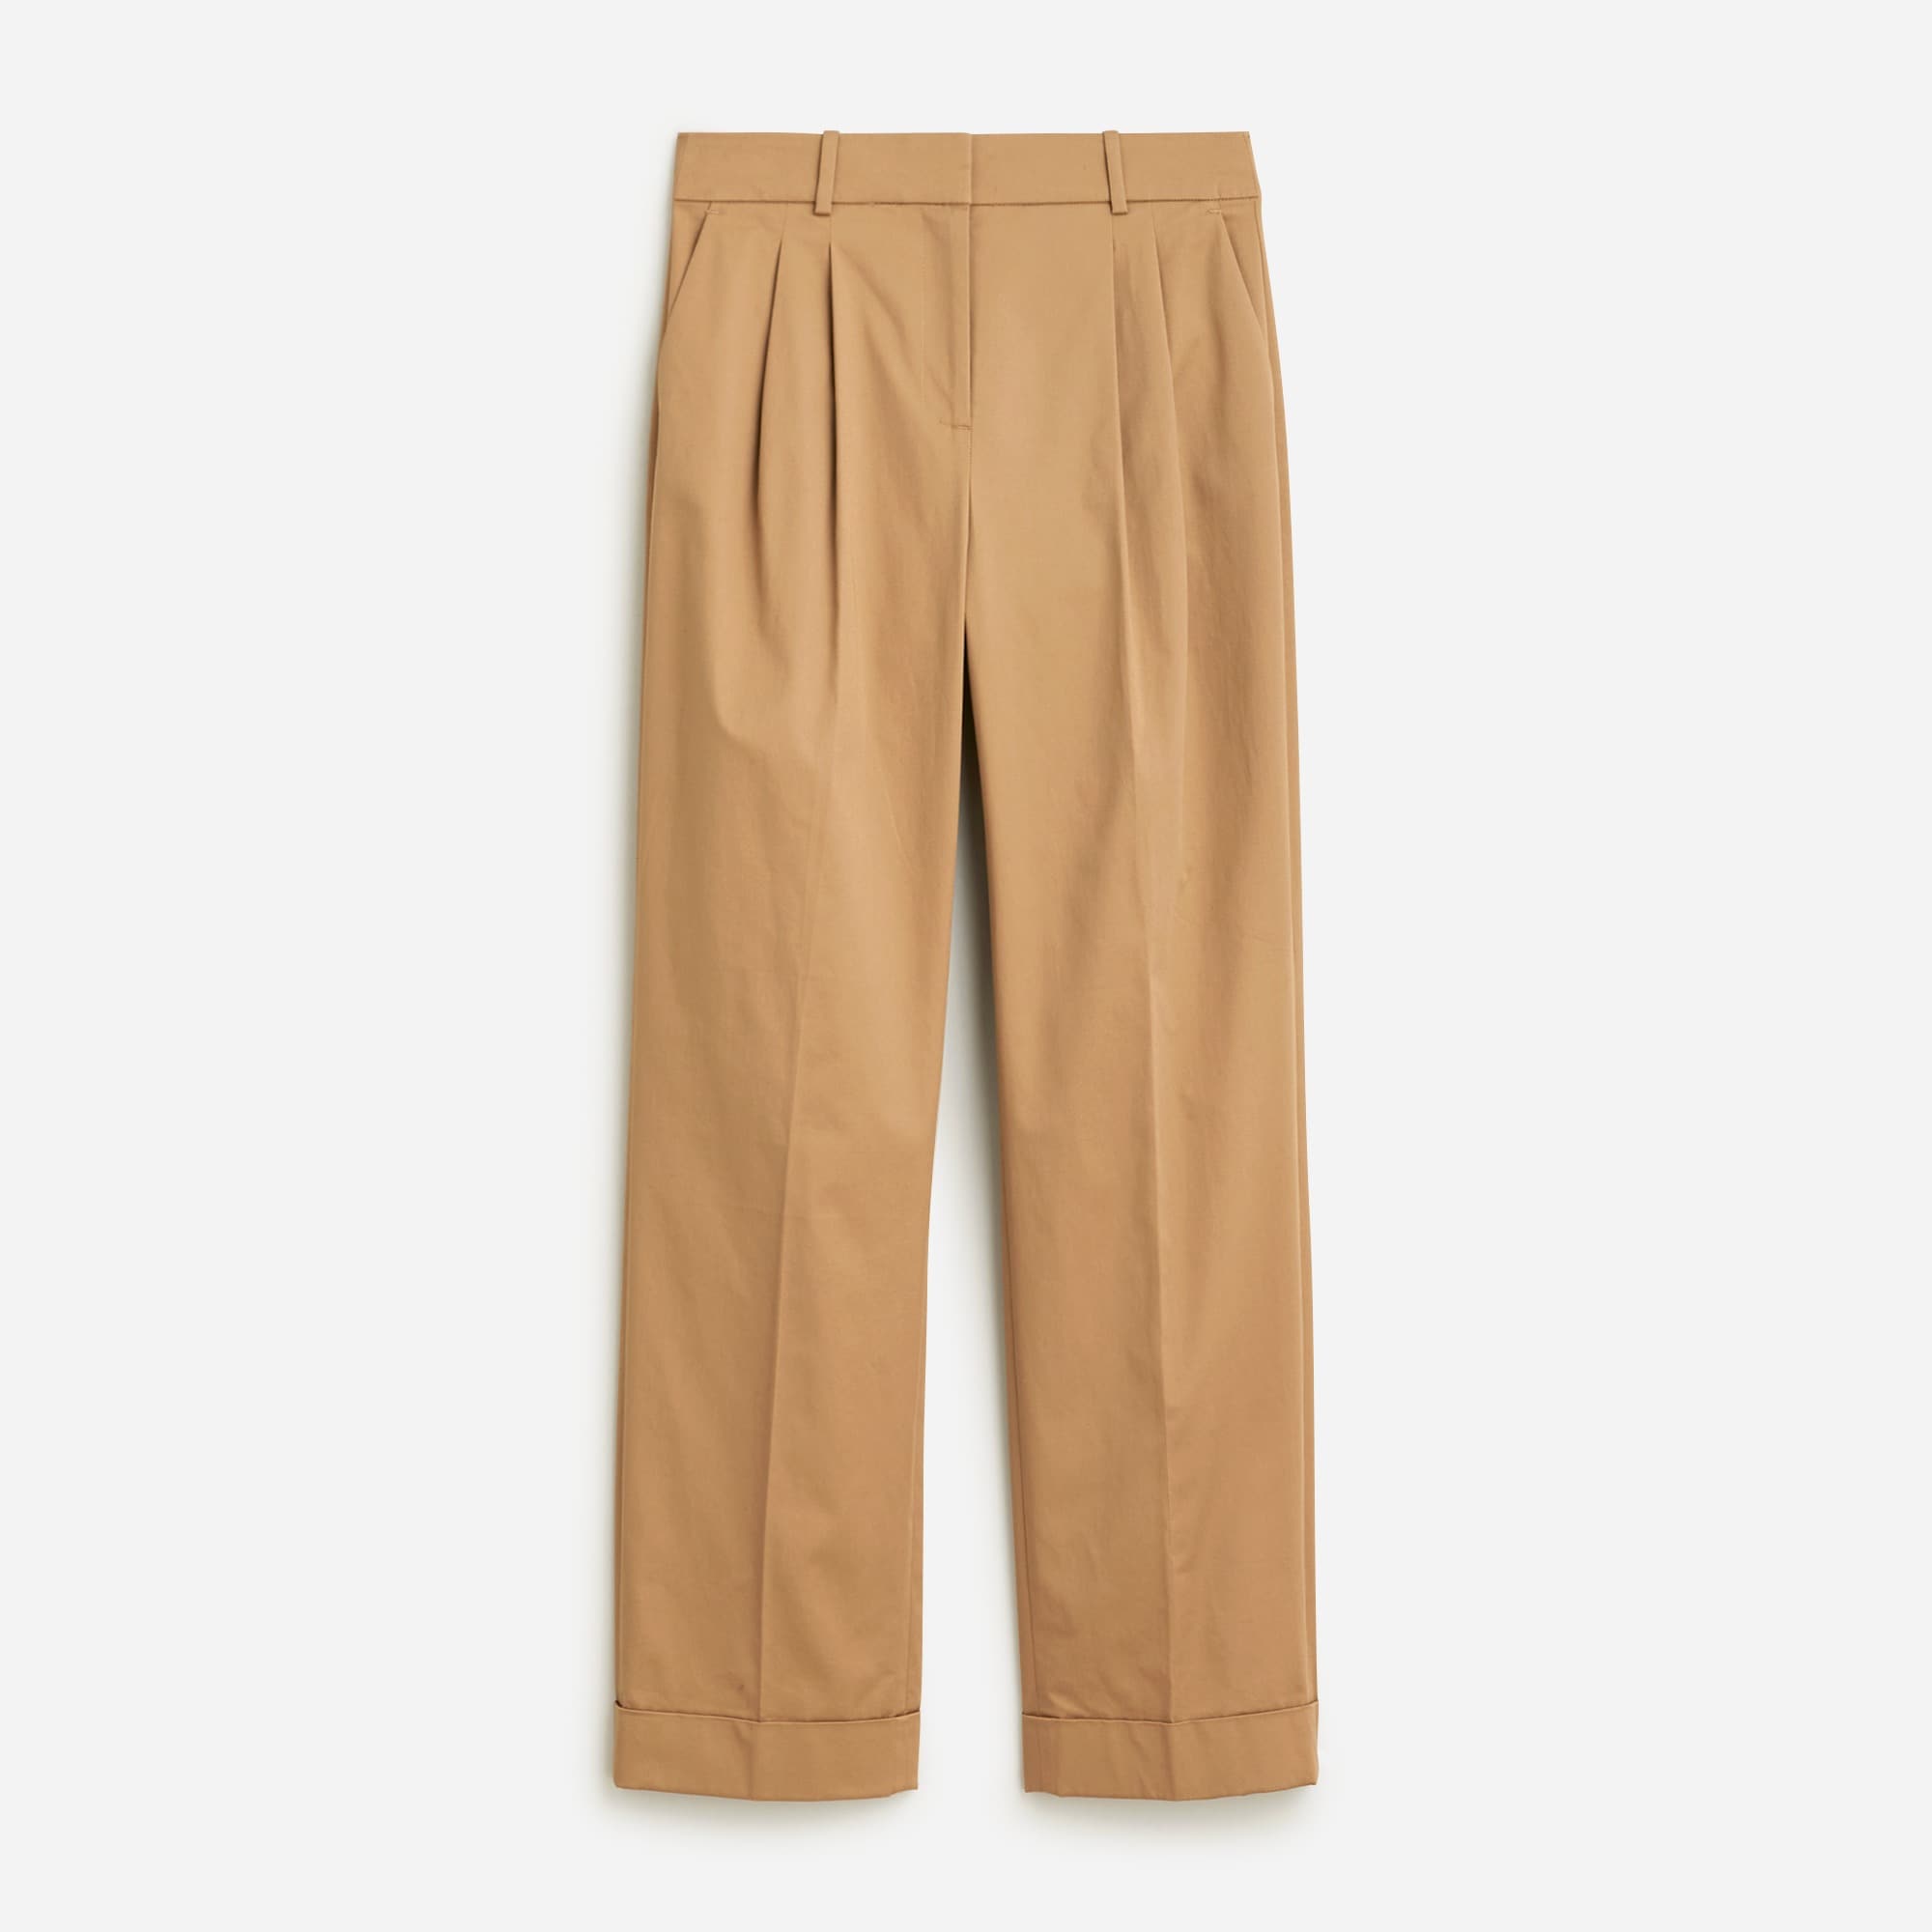  Petite wide-leg essential pant in lightweight chino